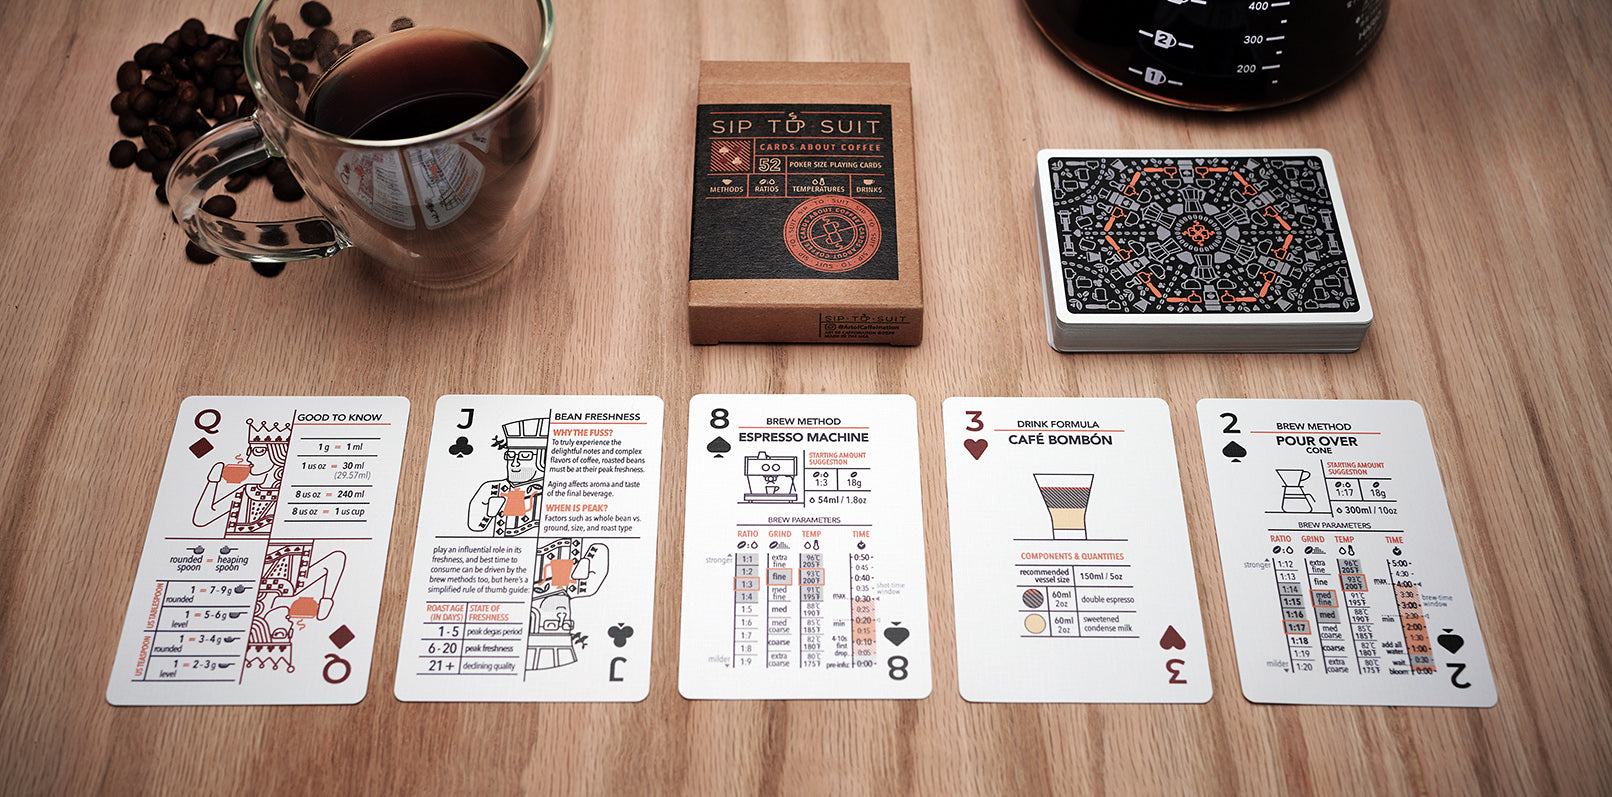 SIP-TO-SUIT Cards About Coffee - Standard Edition - Art of Caffeination